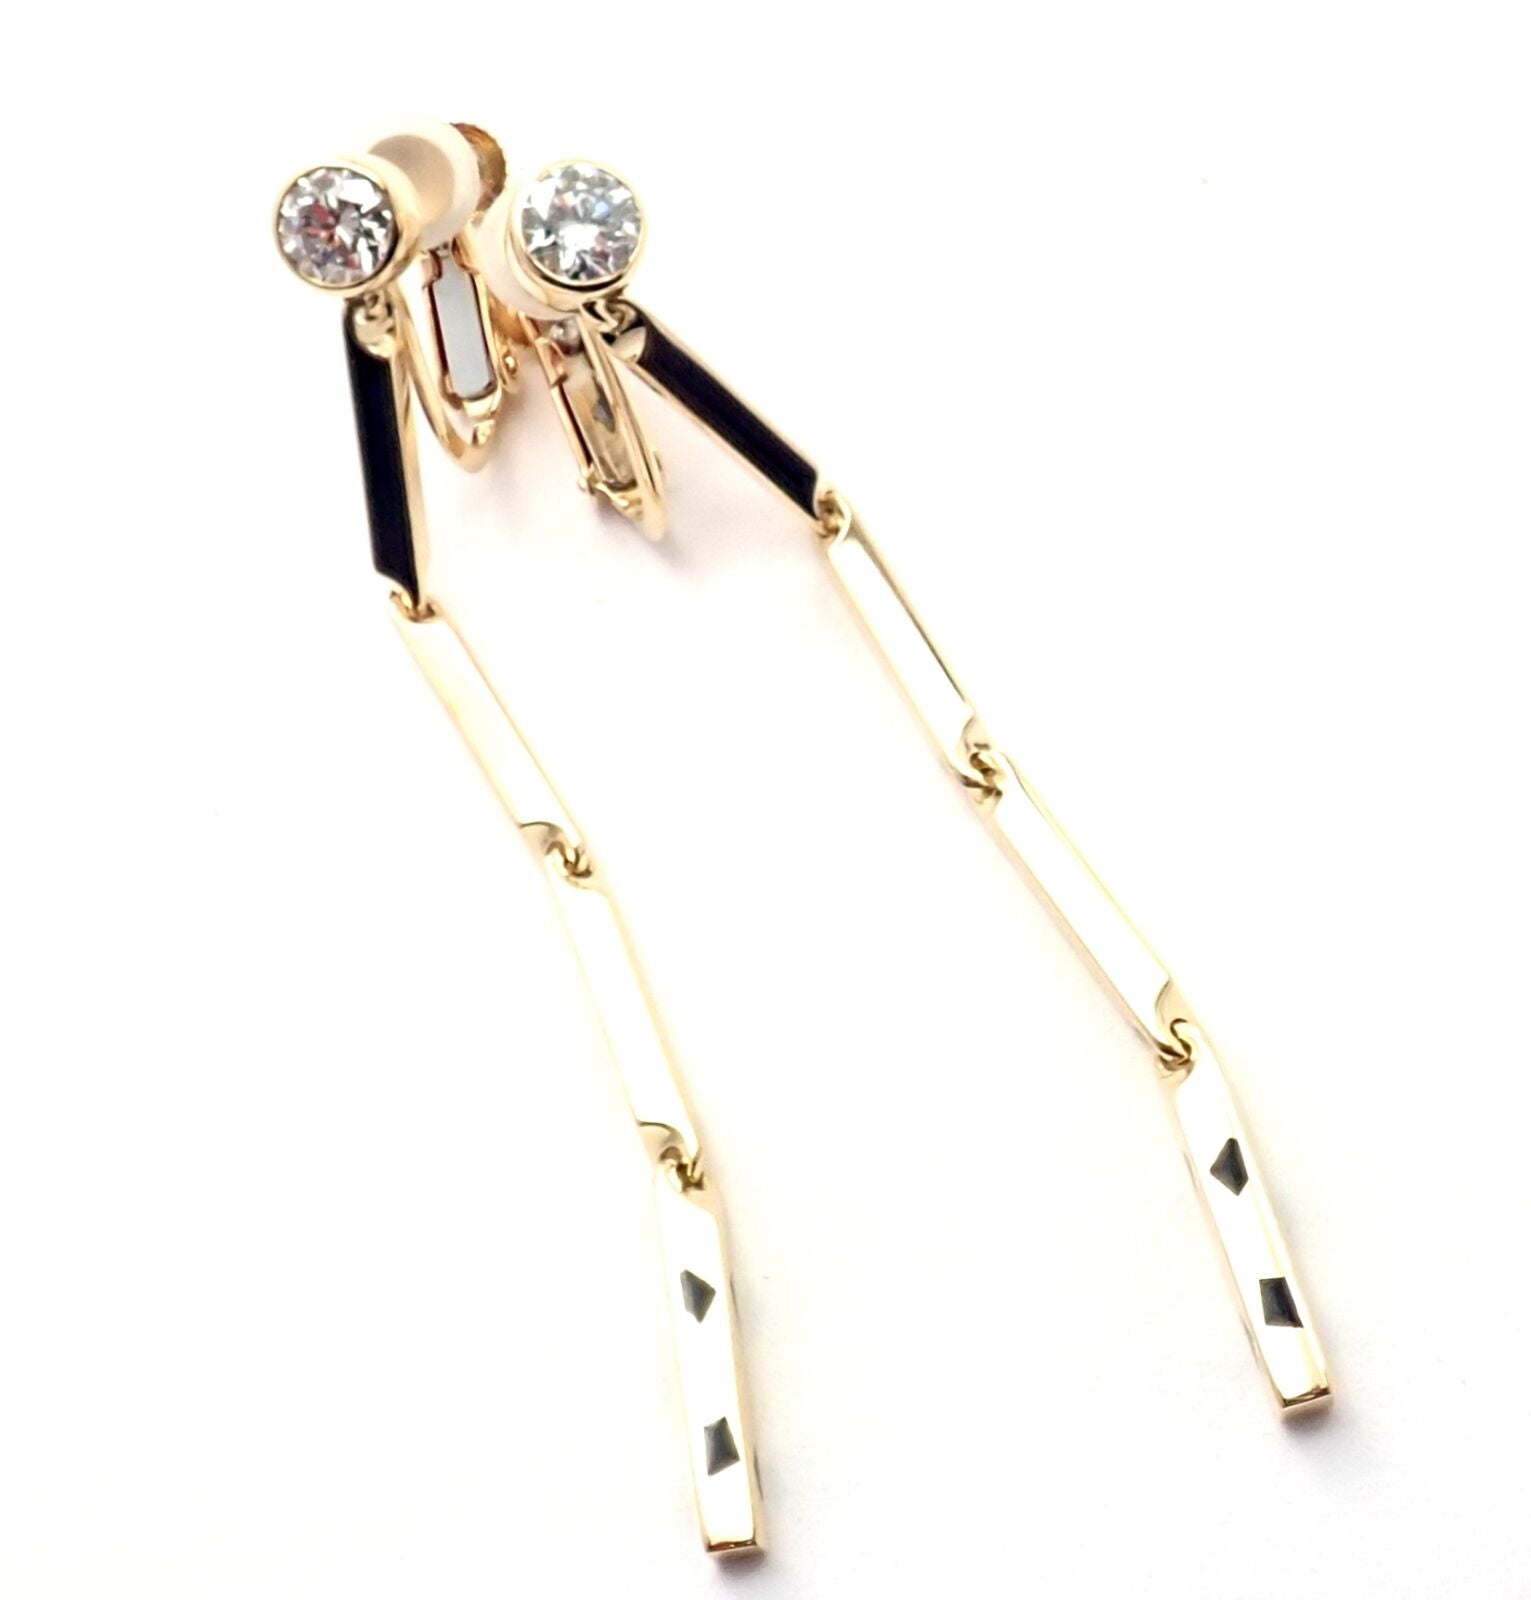 Cartier Jewelry & Watches:Fine Jewelry:Earrings Authentic! Cartier Panther 18k Yellow Gold Diamond Lacquer Link Earrings Cert.